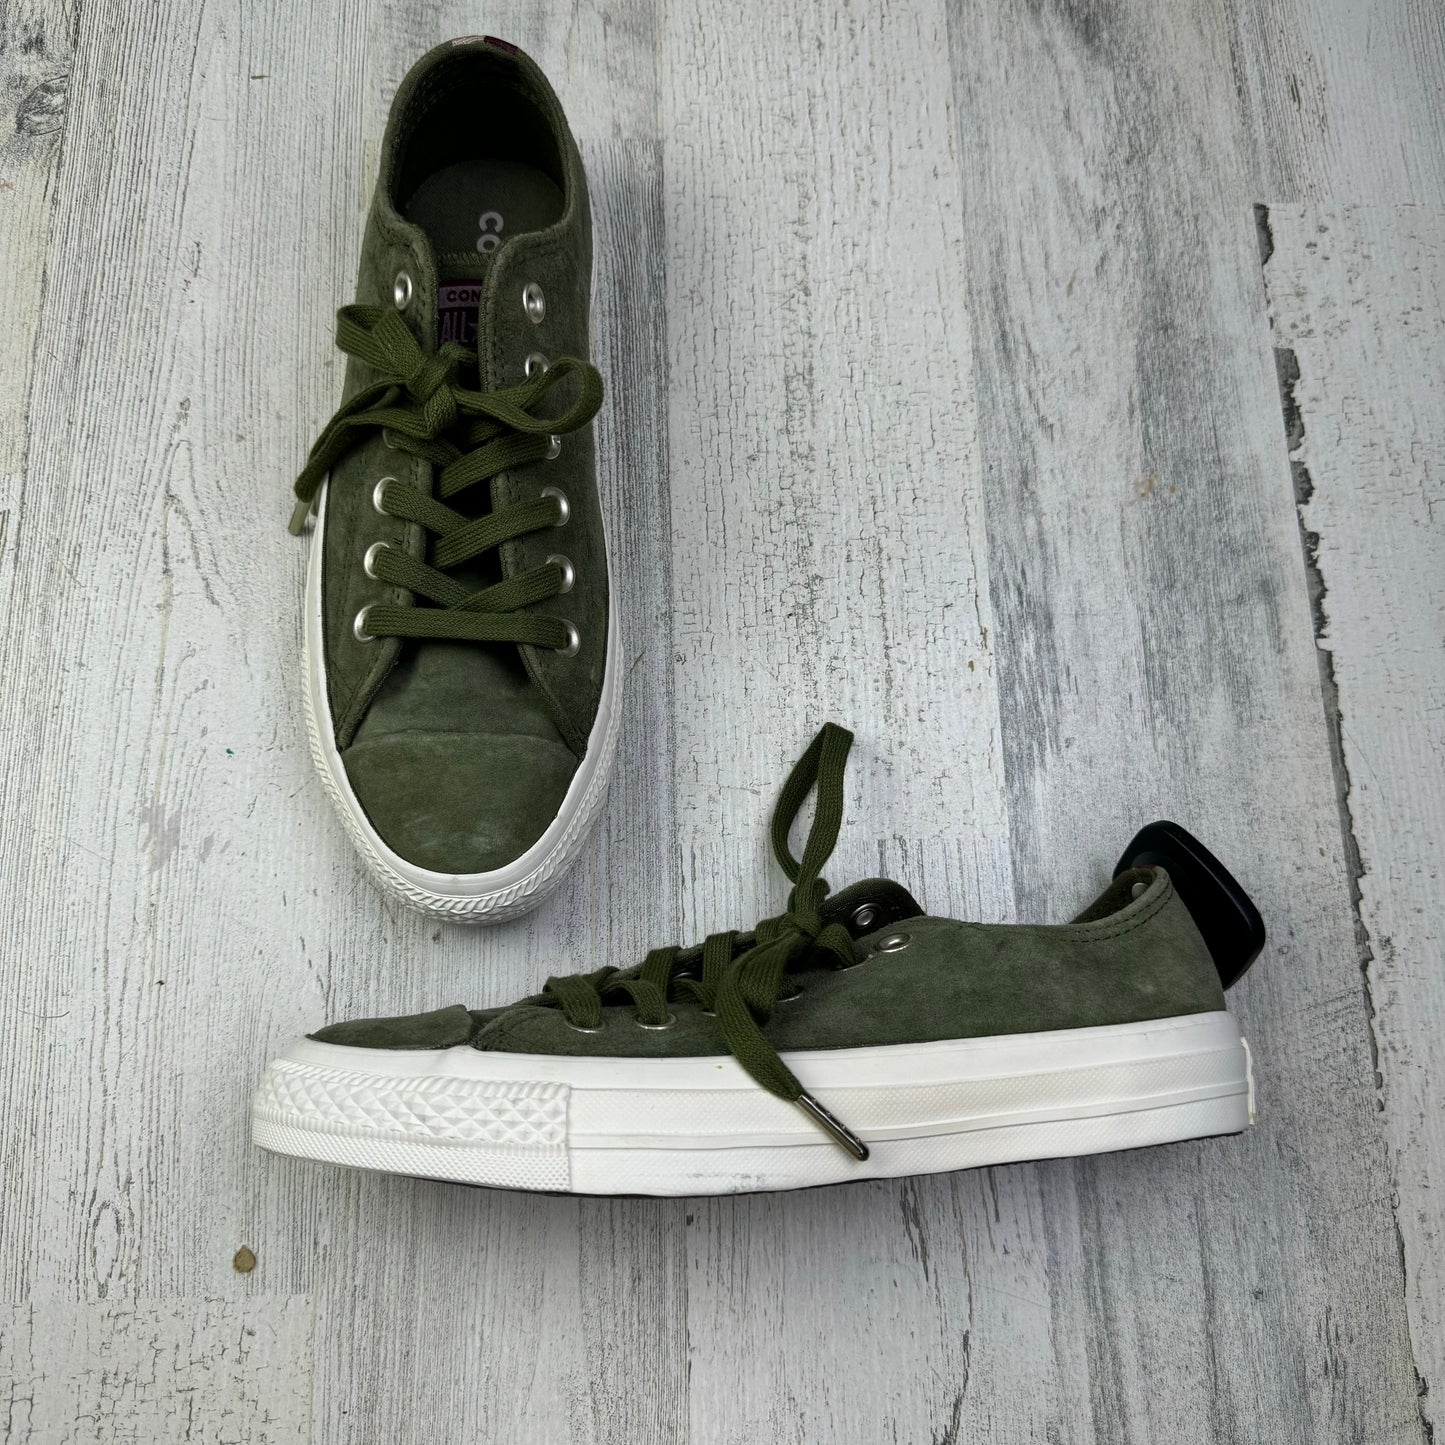 Green Shoes Sneakers Converse, Size 7